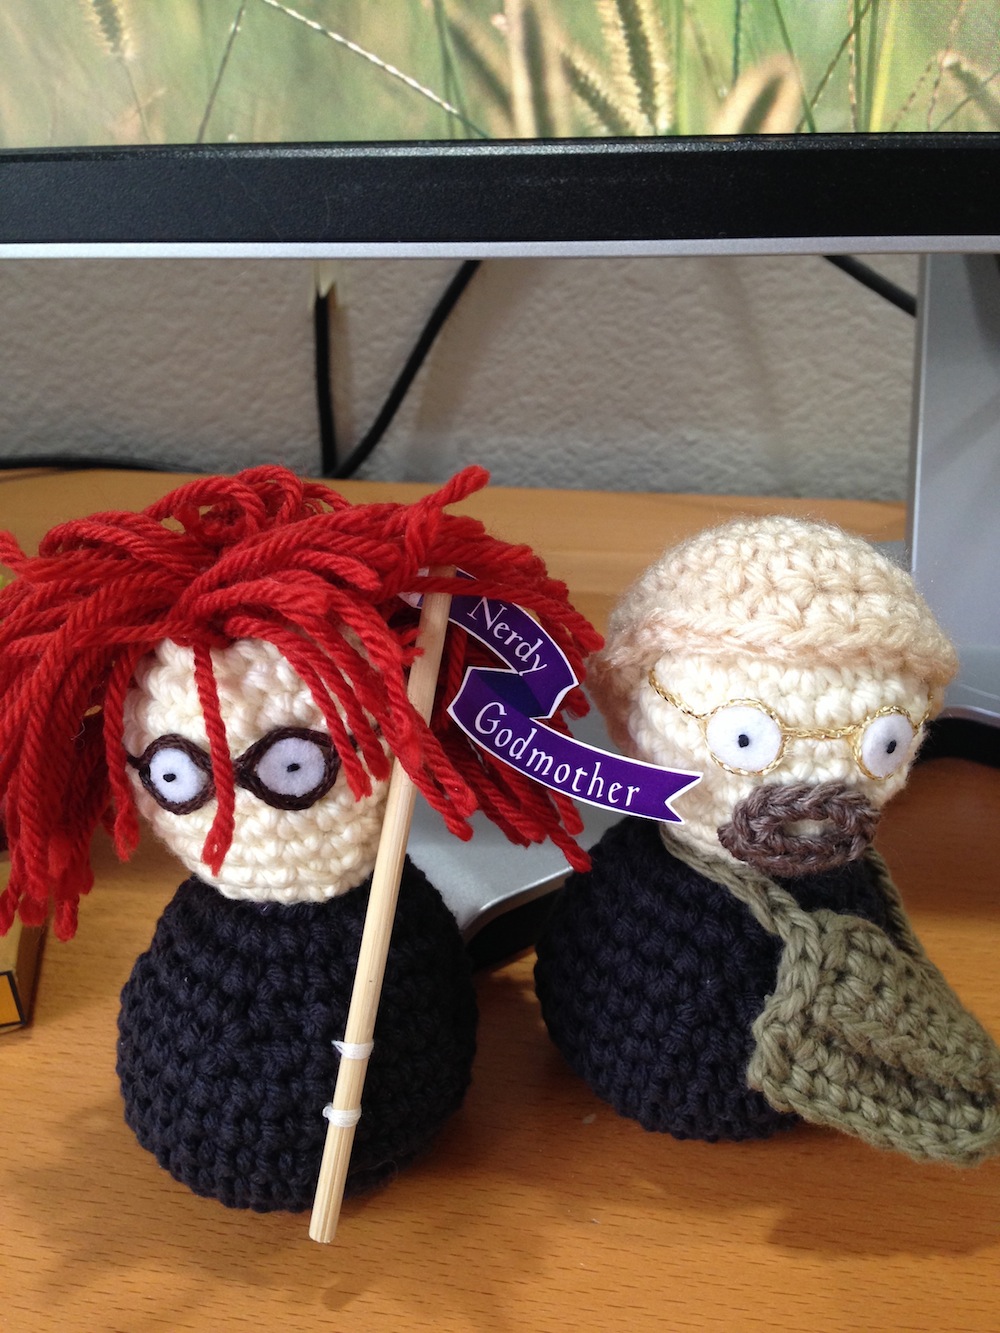 Photo of amigurumi dolls of Rebecca and James Hicks, made by Janet Dahl